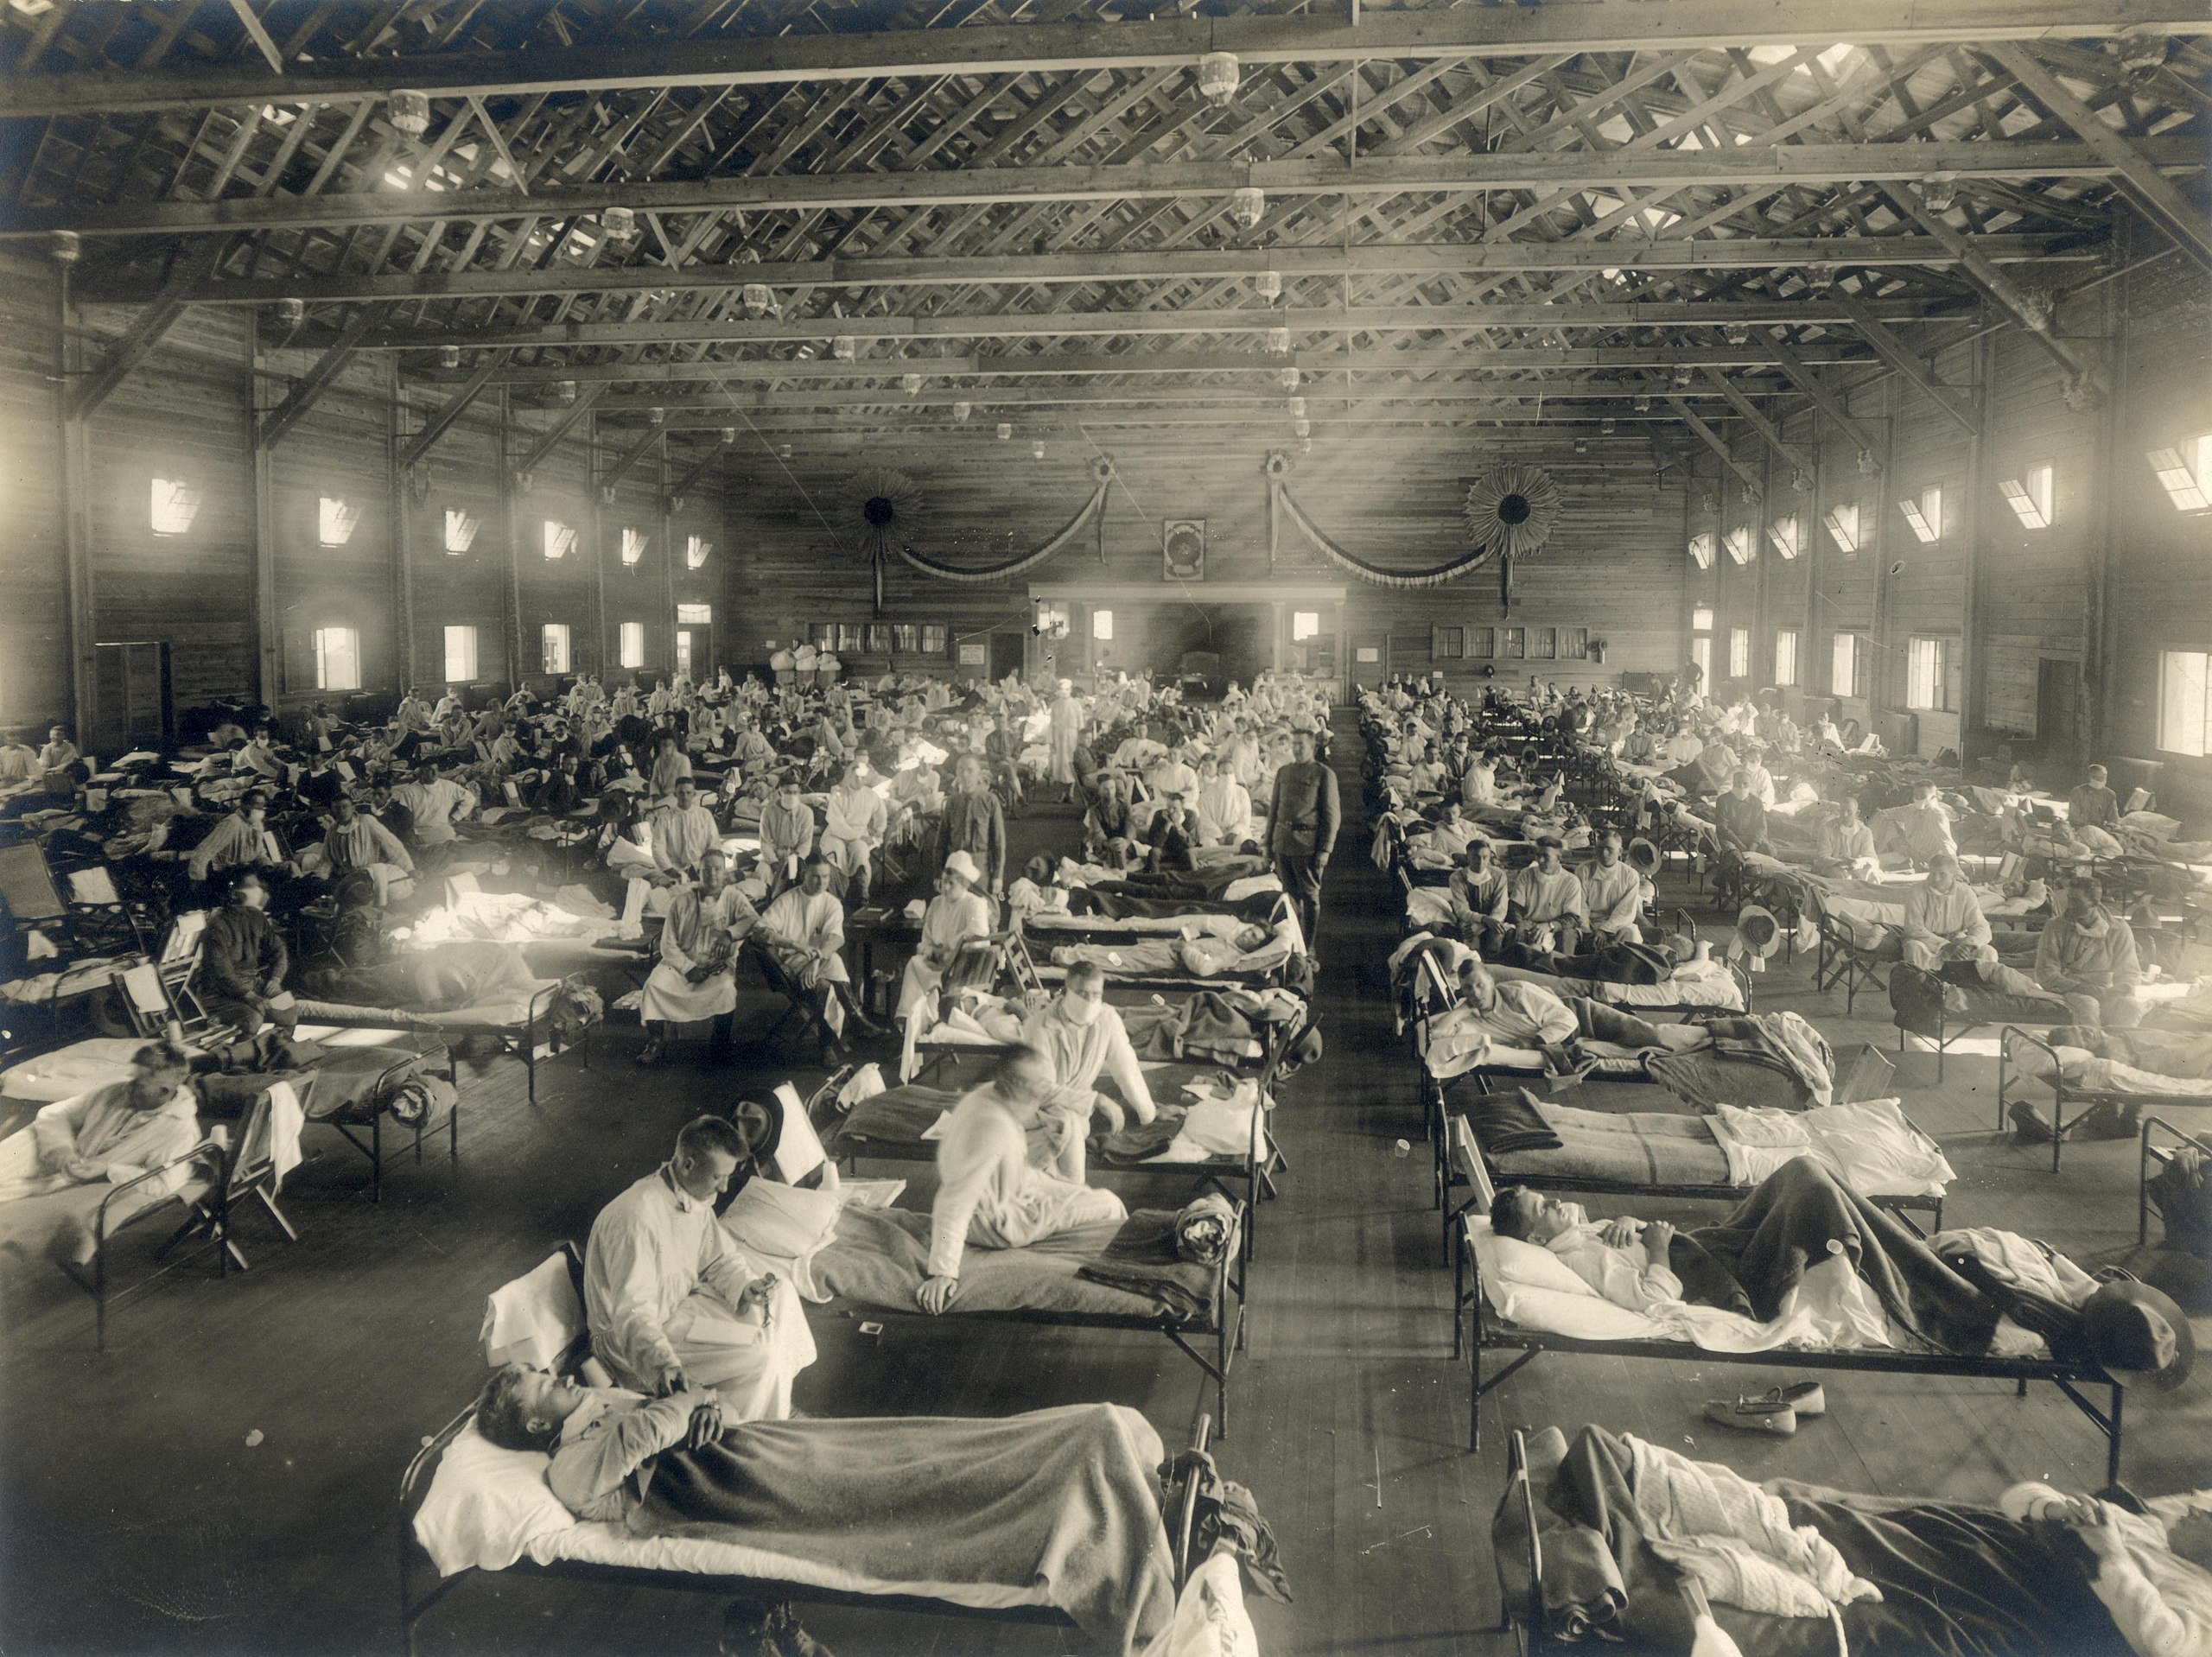 A photograph taken around 1918 of soldiers lying in beds during the Spanish Flu